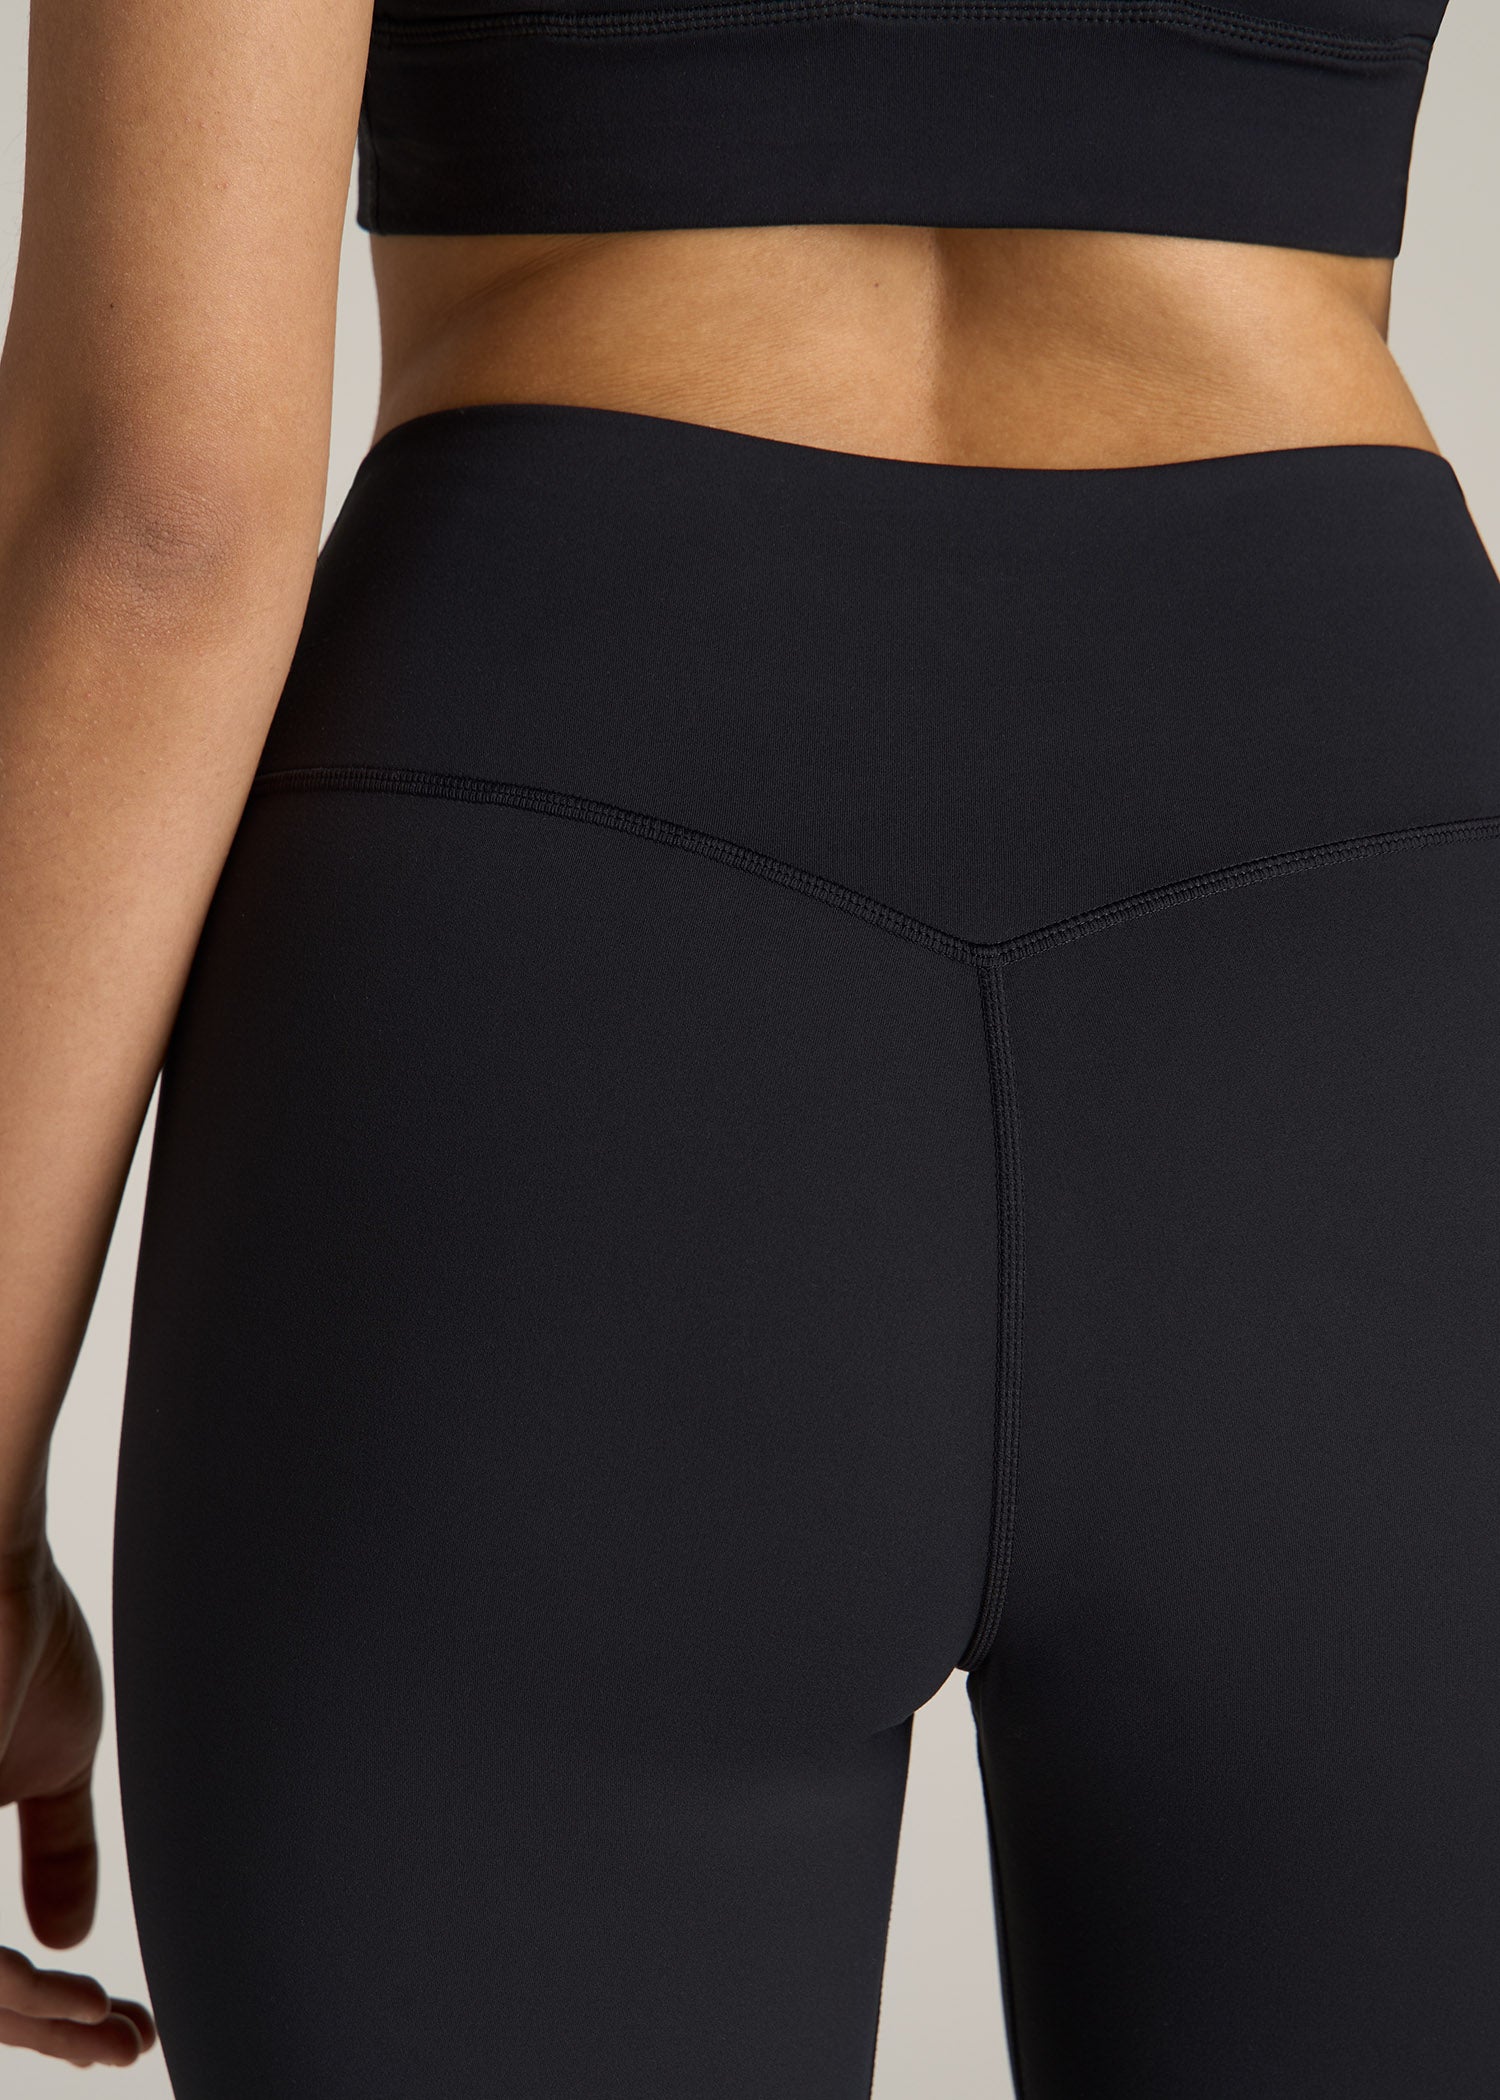 Buy The High-Waisted & Workout Leggings For Women – La Patricia Fashion